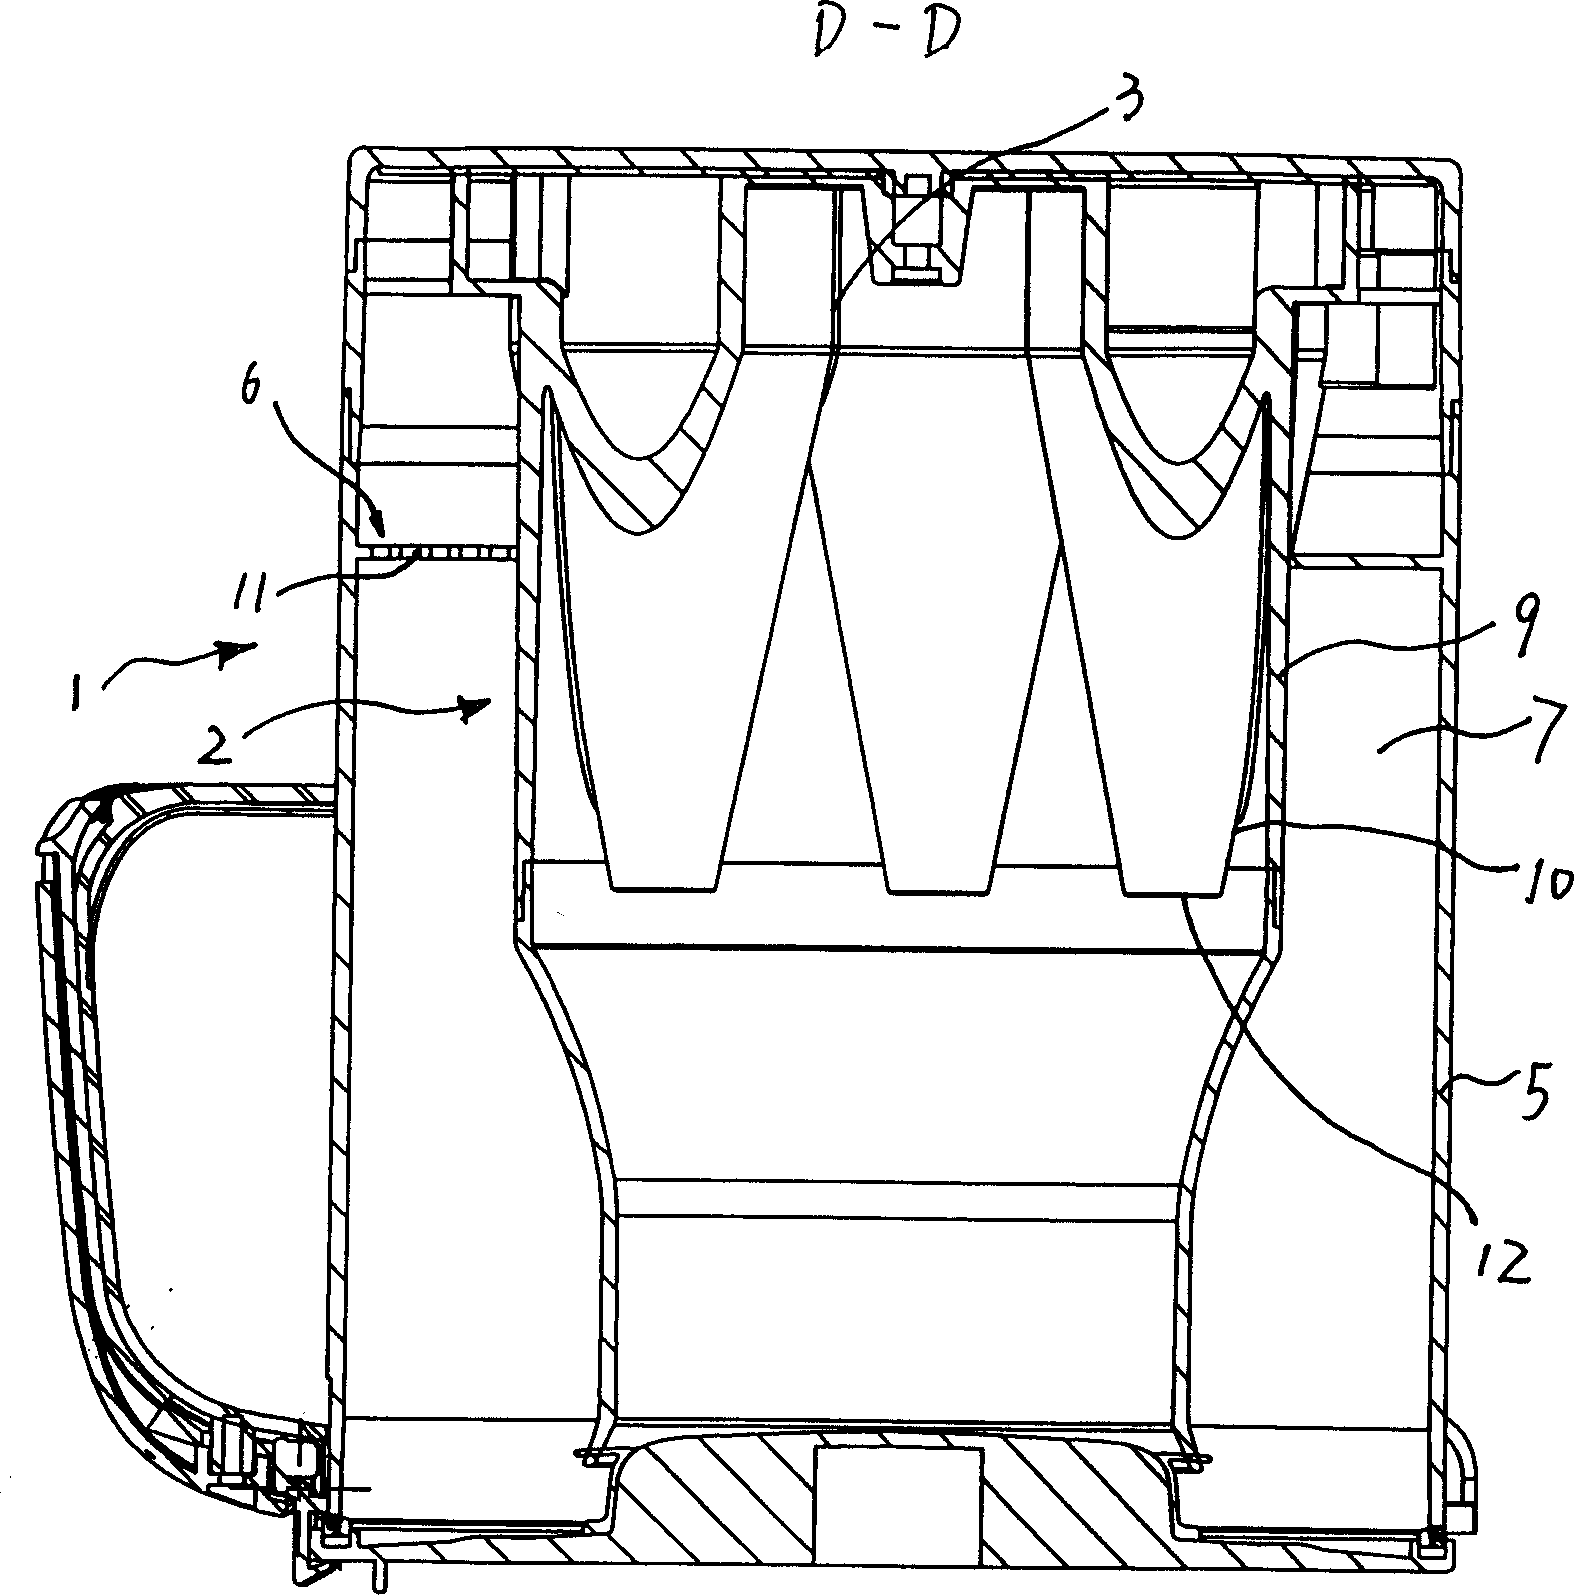 Apparatus for separating dust from vacuum cleaner